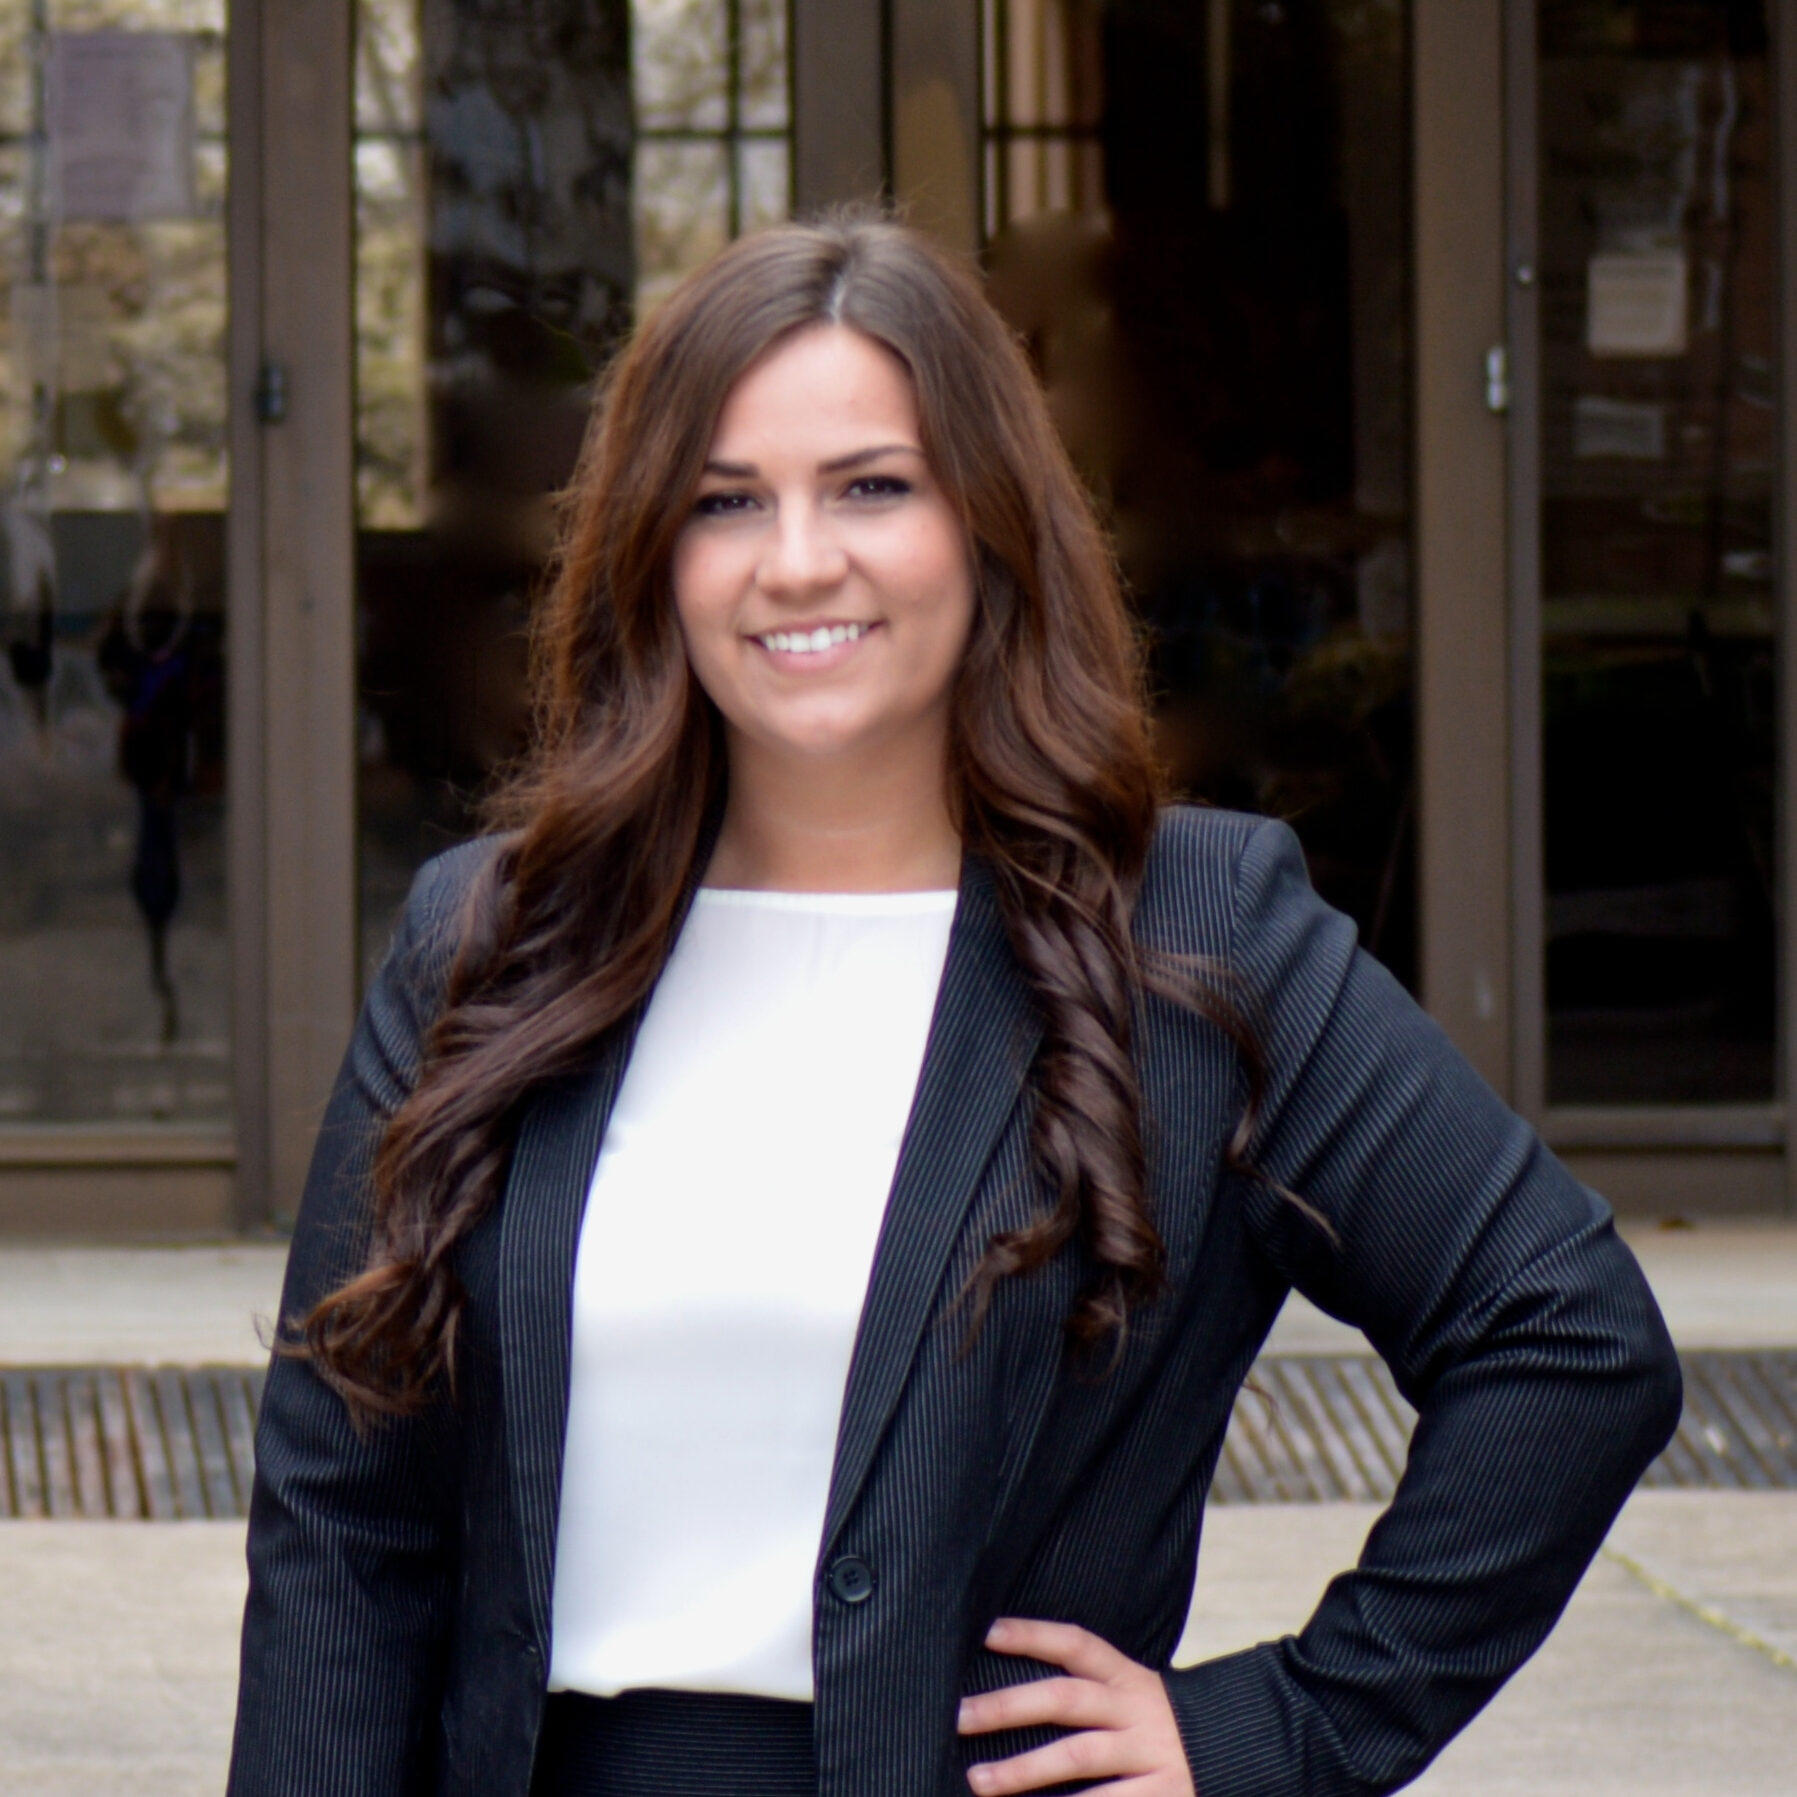 Courtney R. Todd is a 2014 graduate of the University of South Carolina Honors College and a 2017 cu Morris Law Accident and Injury Lawyers, LLC Myrtle Beach (843)232-0944